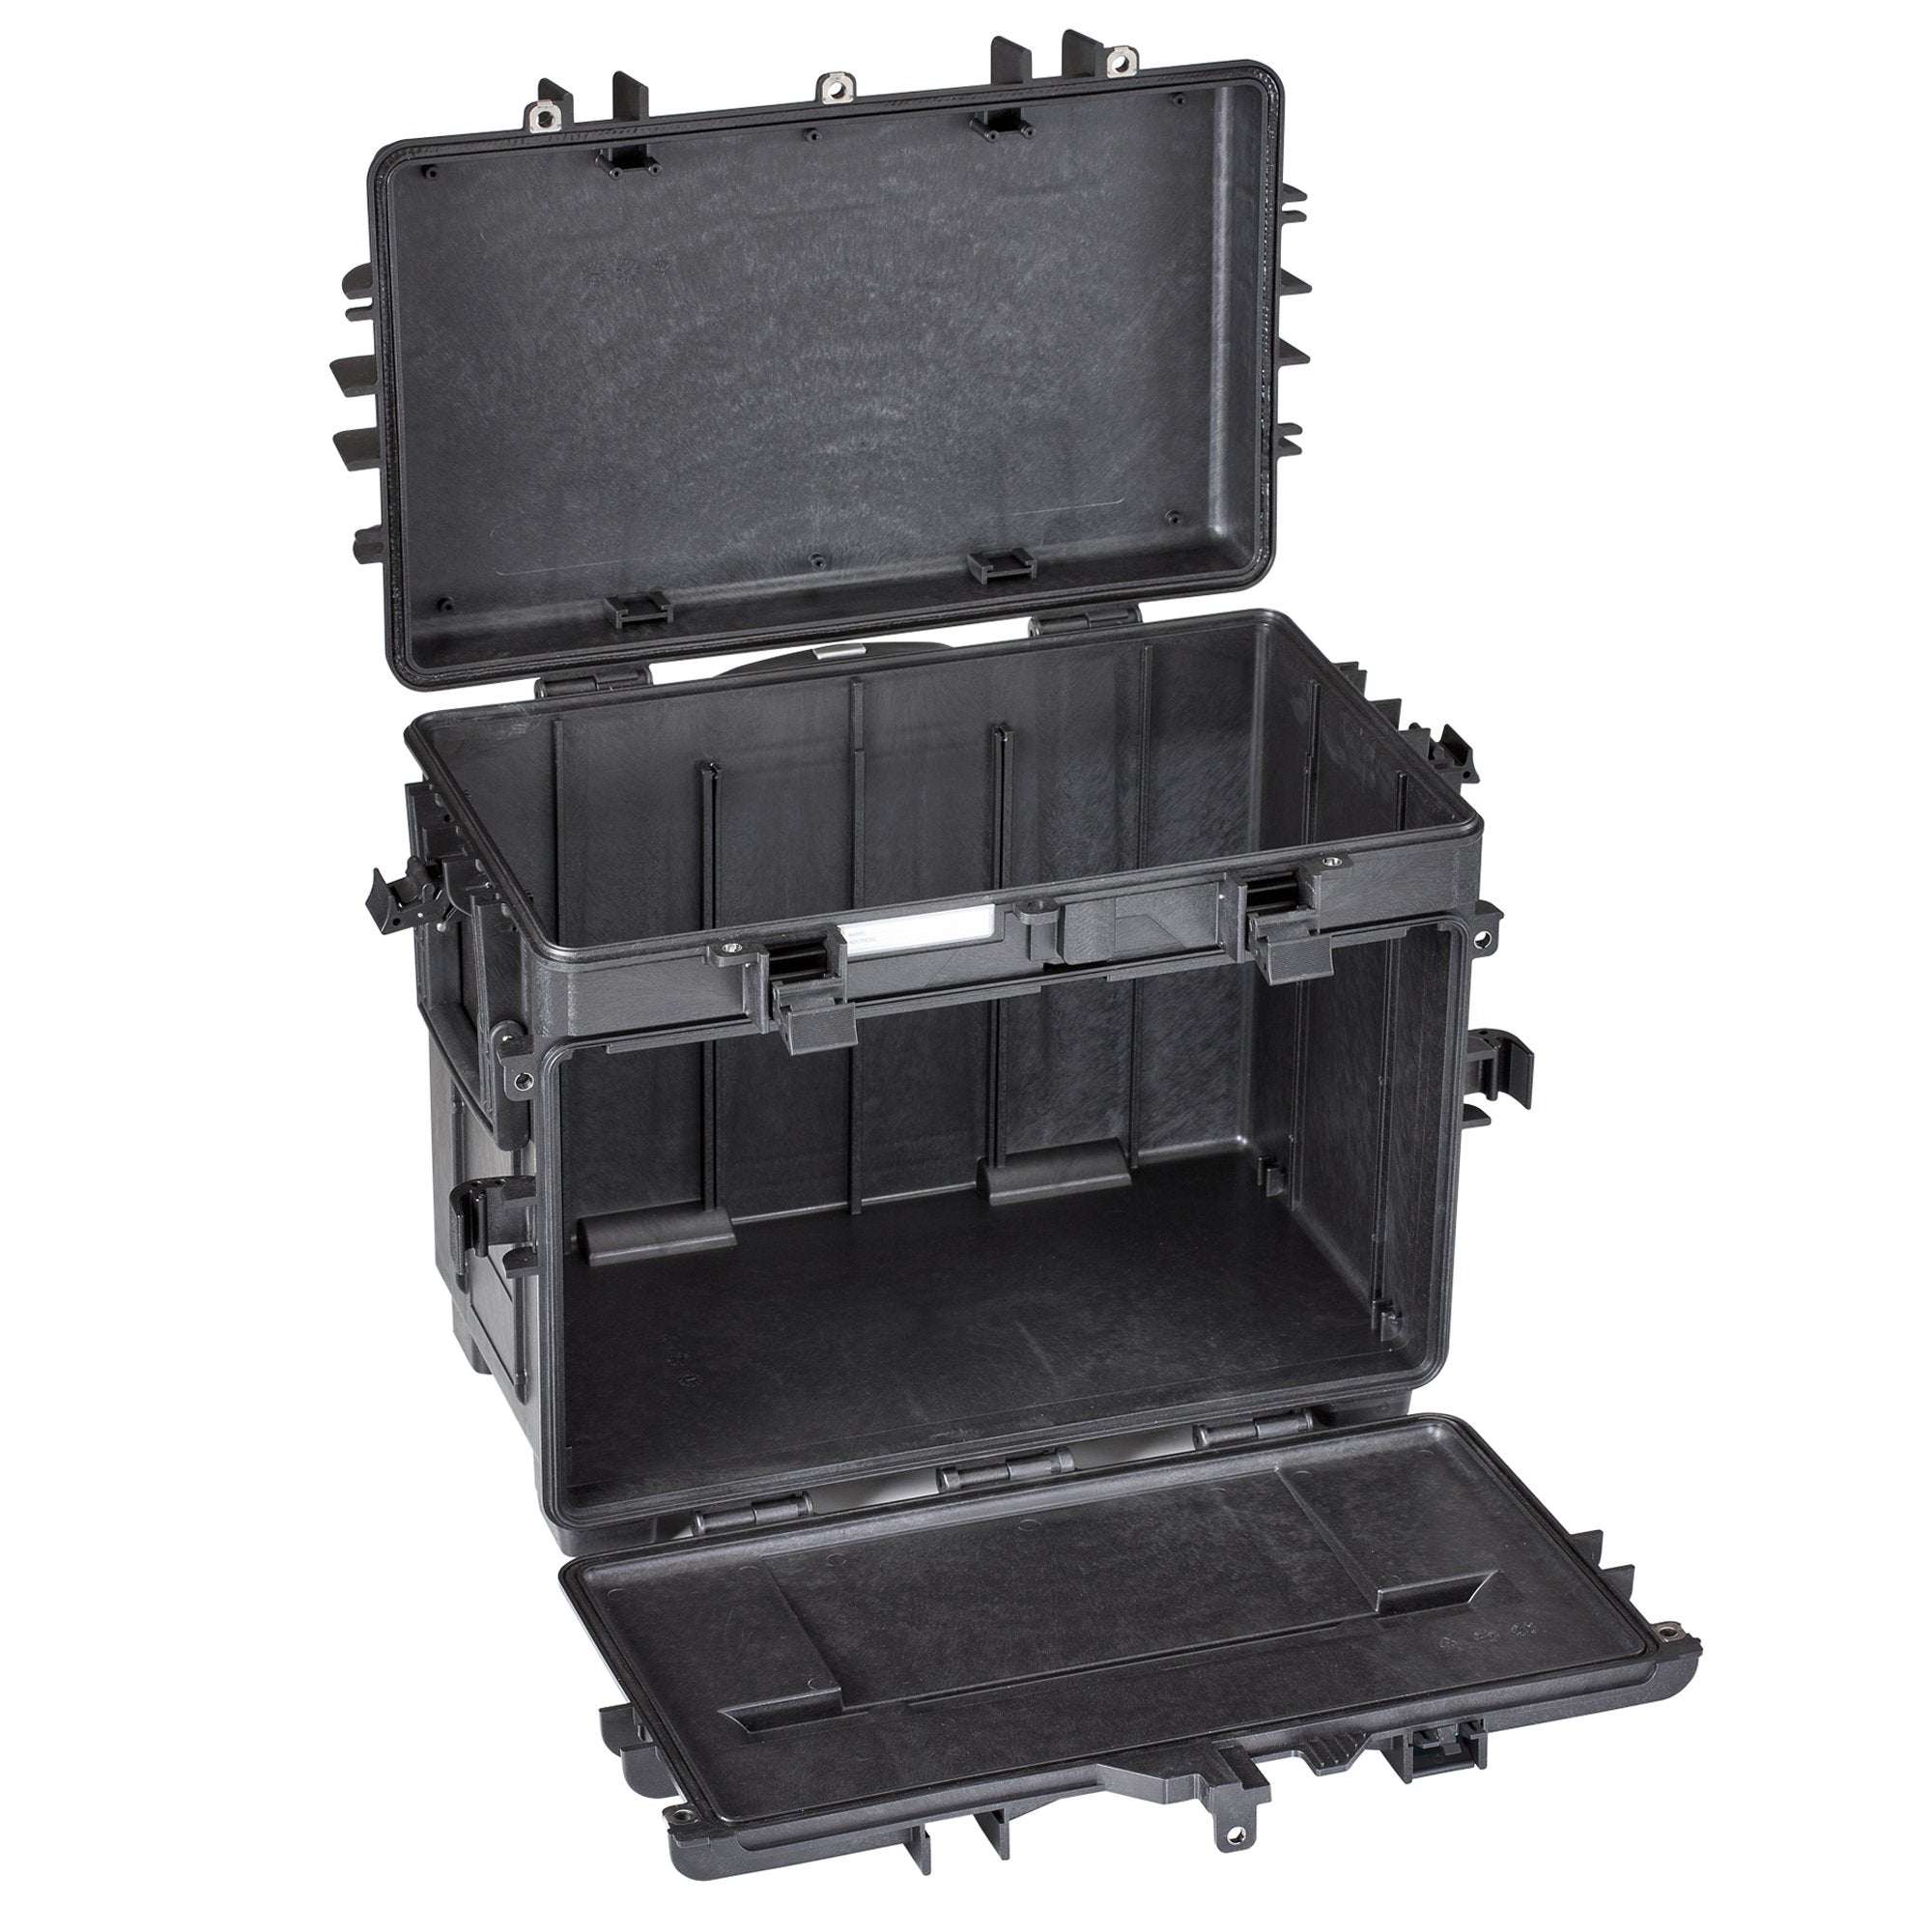 Mobile Tool Chest With Drawers - Military Version – Gray Tools